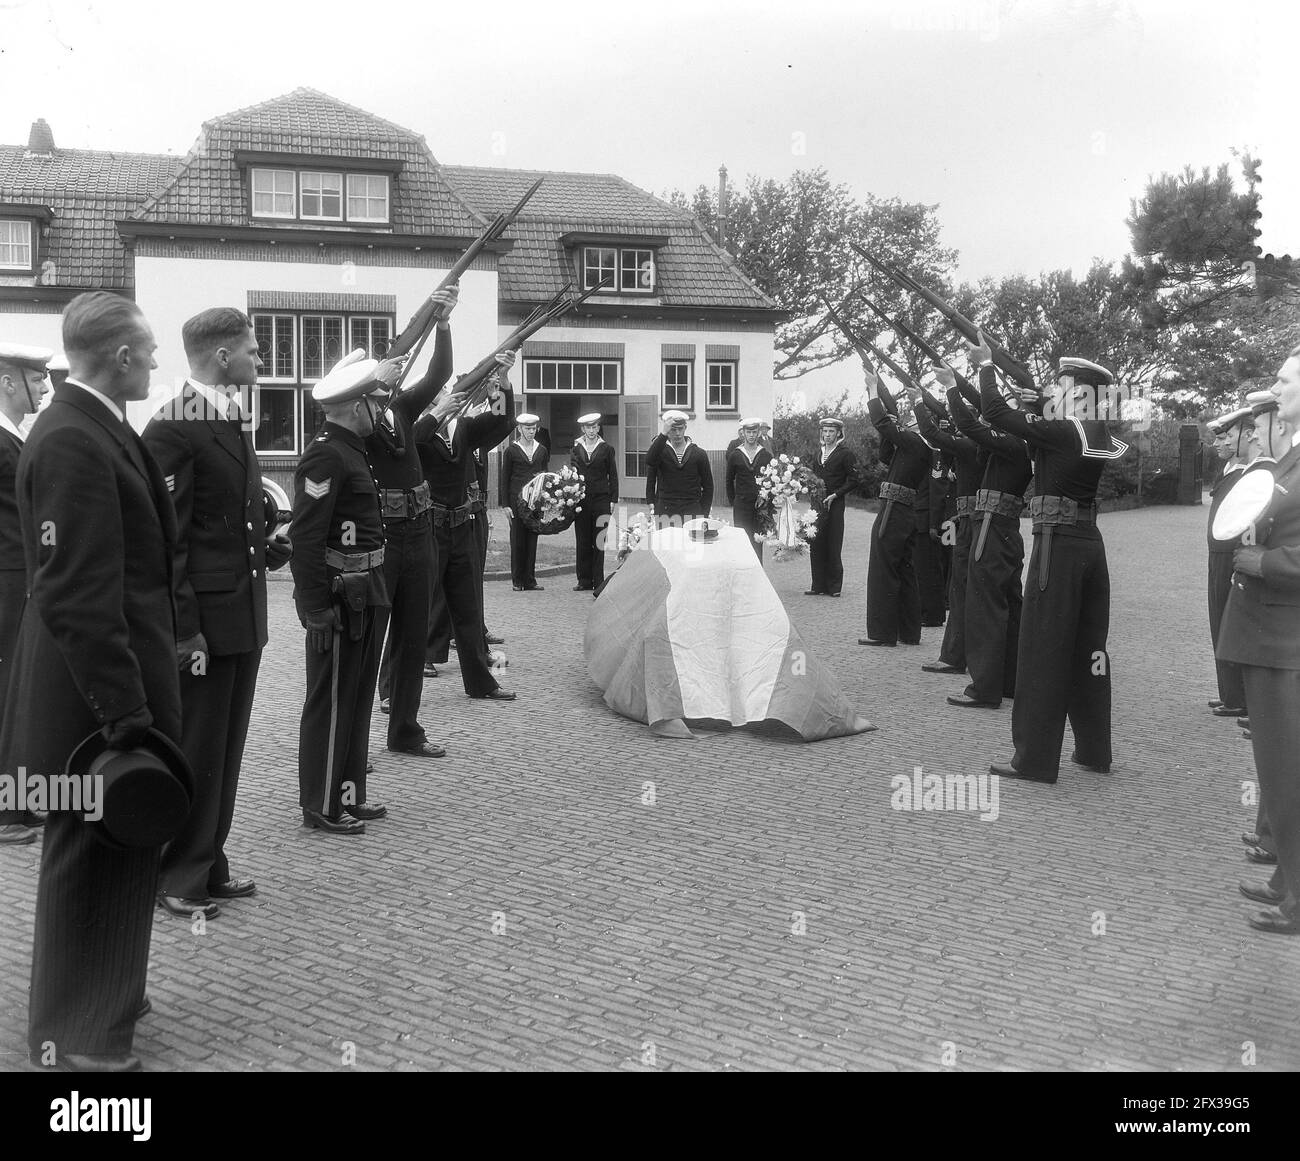 Military funeral skipper Jan Hendrik Simonis Den Helder, 5 July 1955, funerals, boatmen, The Netherlands, 20th century press agency photo, news to remember, documentary, historic photography 1945-1990, visual stories, human history of the Twentieth Century, capturing moments in time Stock Photo